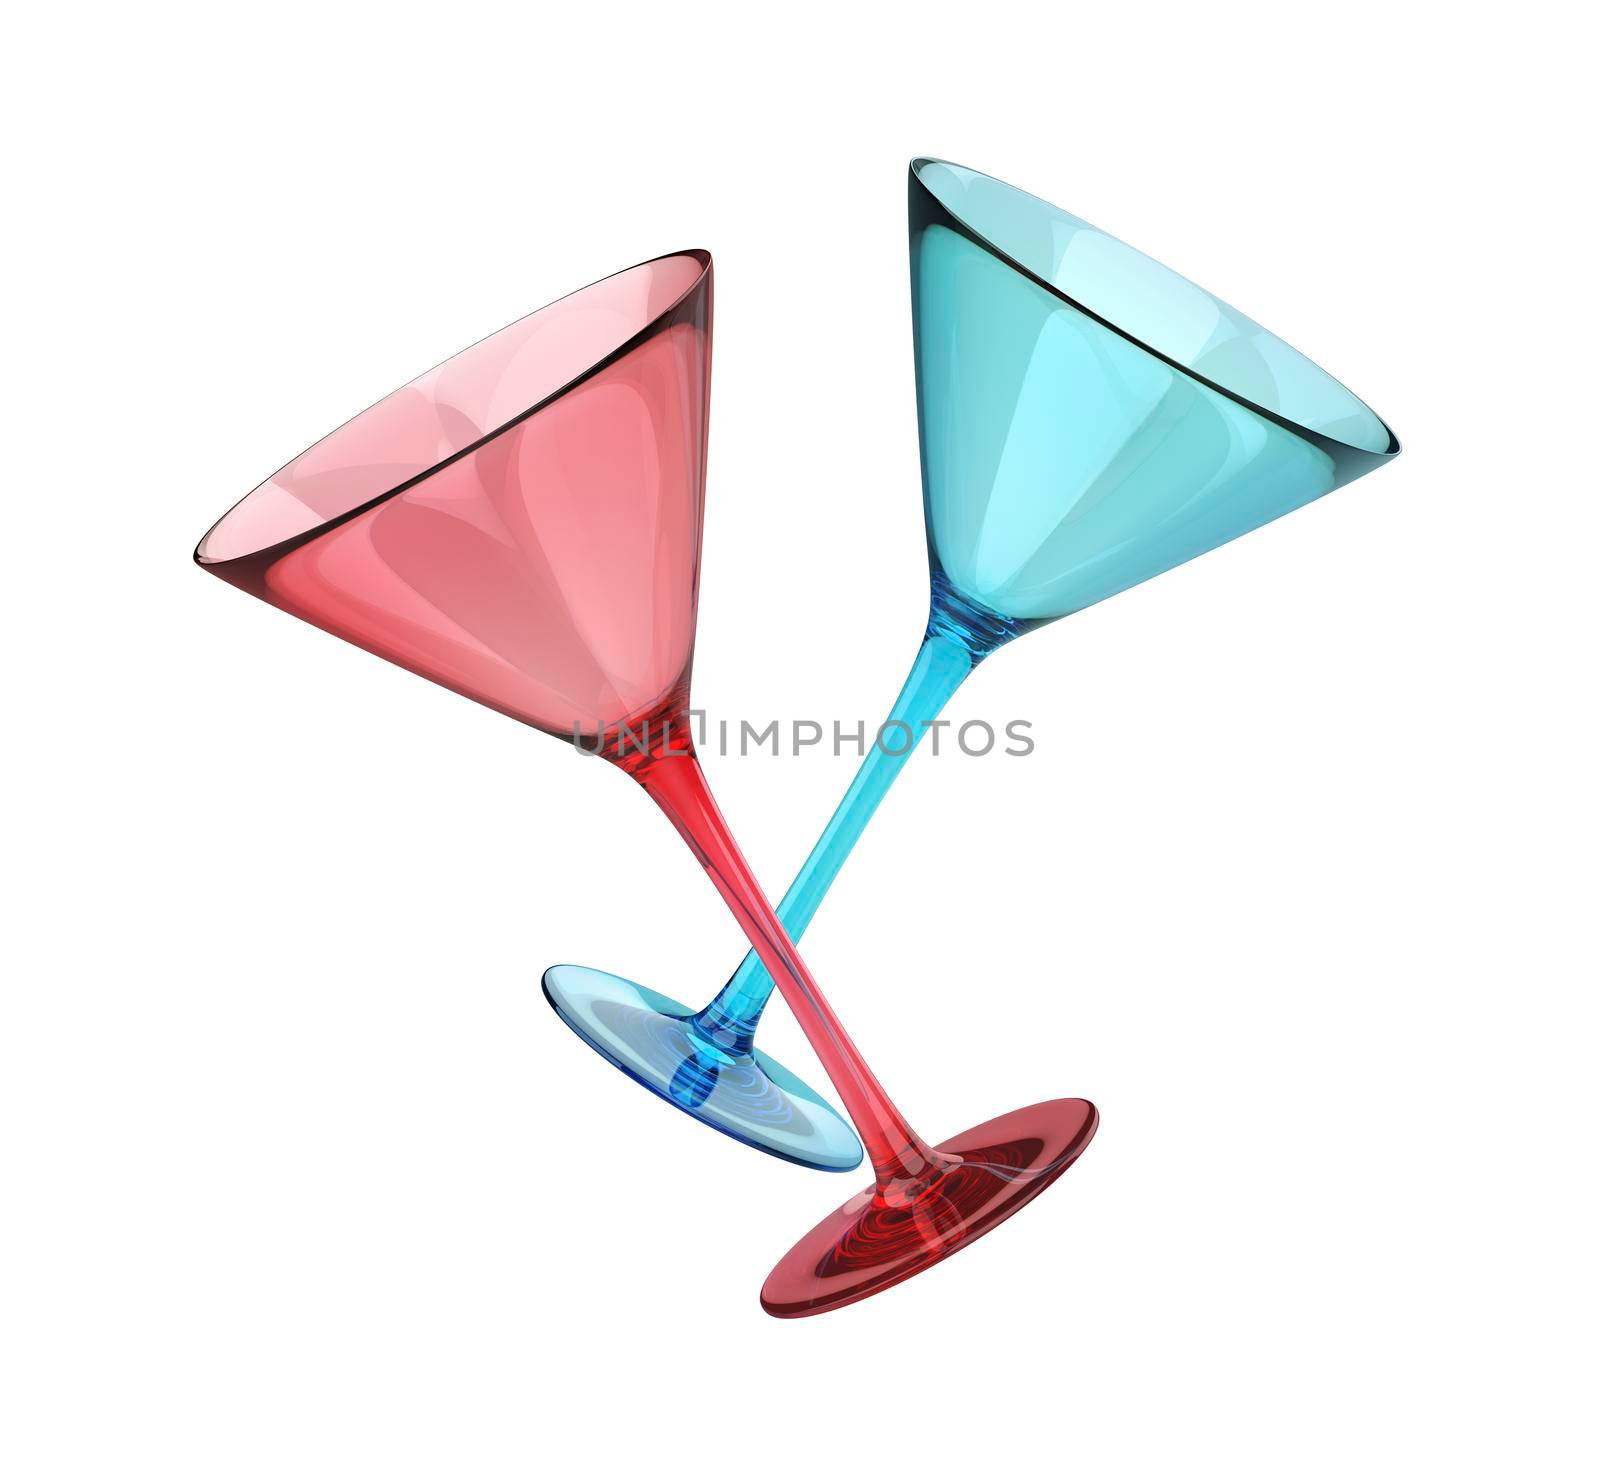 Red and blue cocktail glasses by magraphics